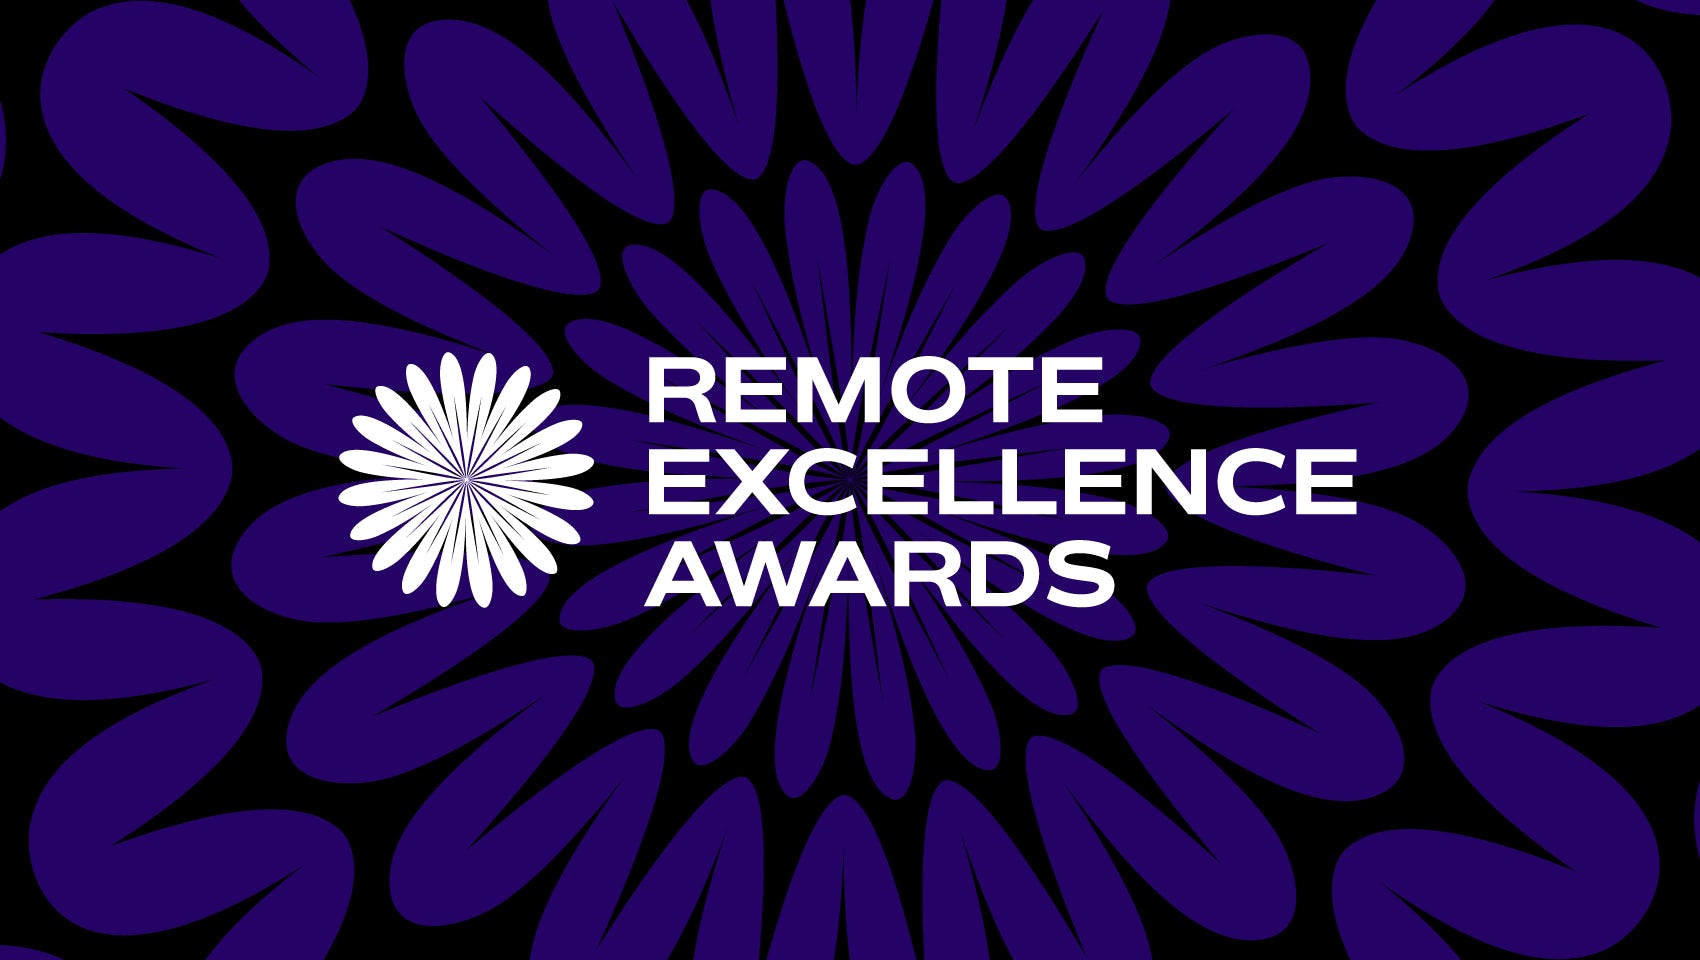 Image about Remote announces 14 winners of the Remote Excellence Awards